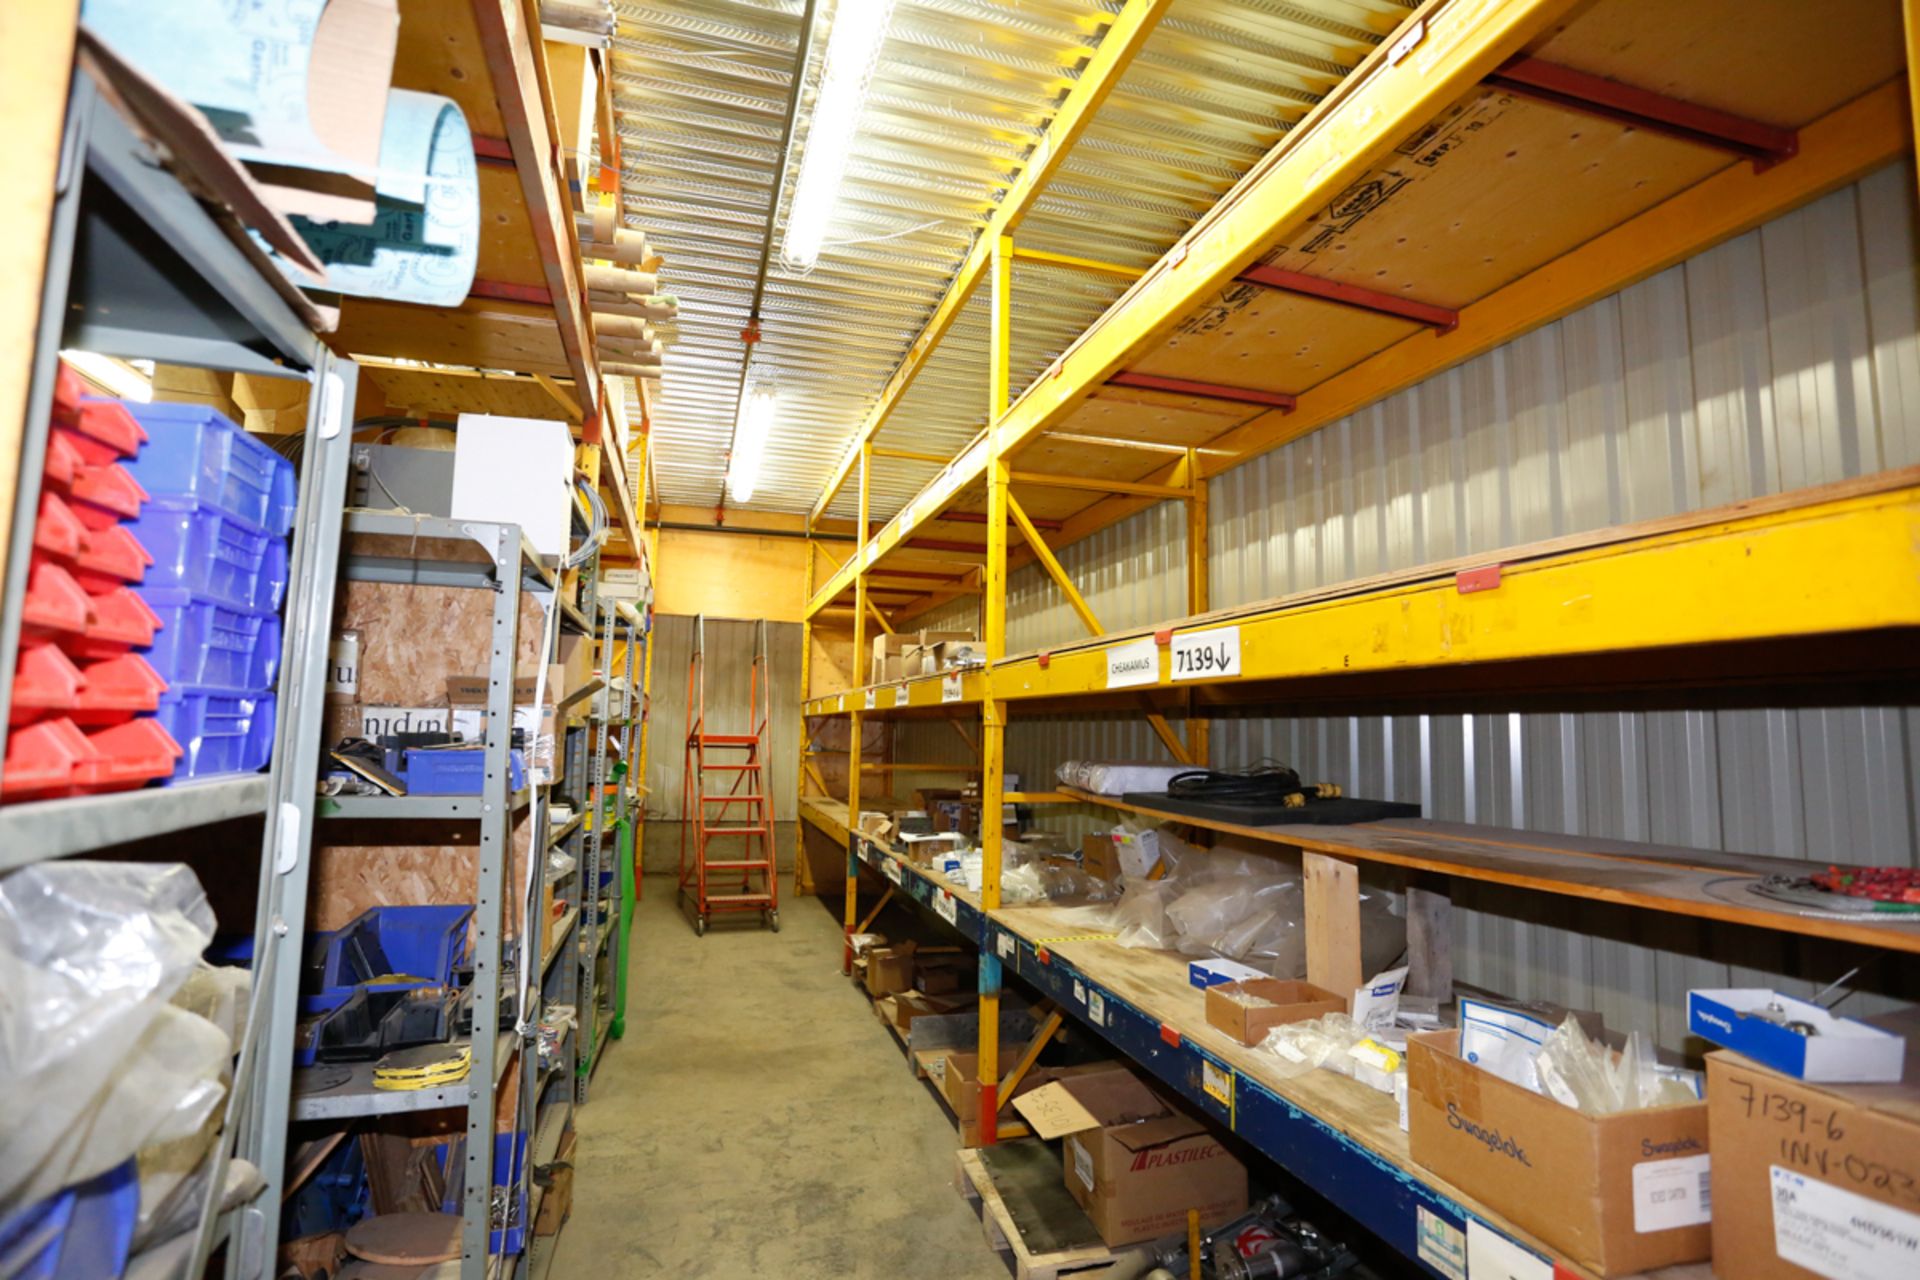 30' X 28' X 12' HIGH MEZZANINE COMPRISING OF 15 SECTIONS OF RACKING, FLOOR & GUARDRAIL - Image 4 of 5